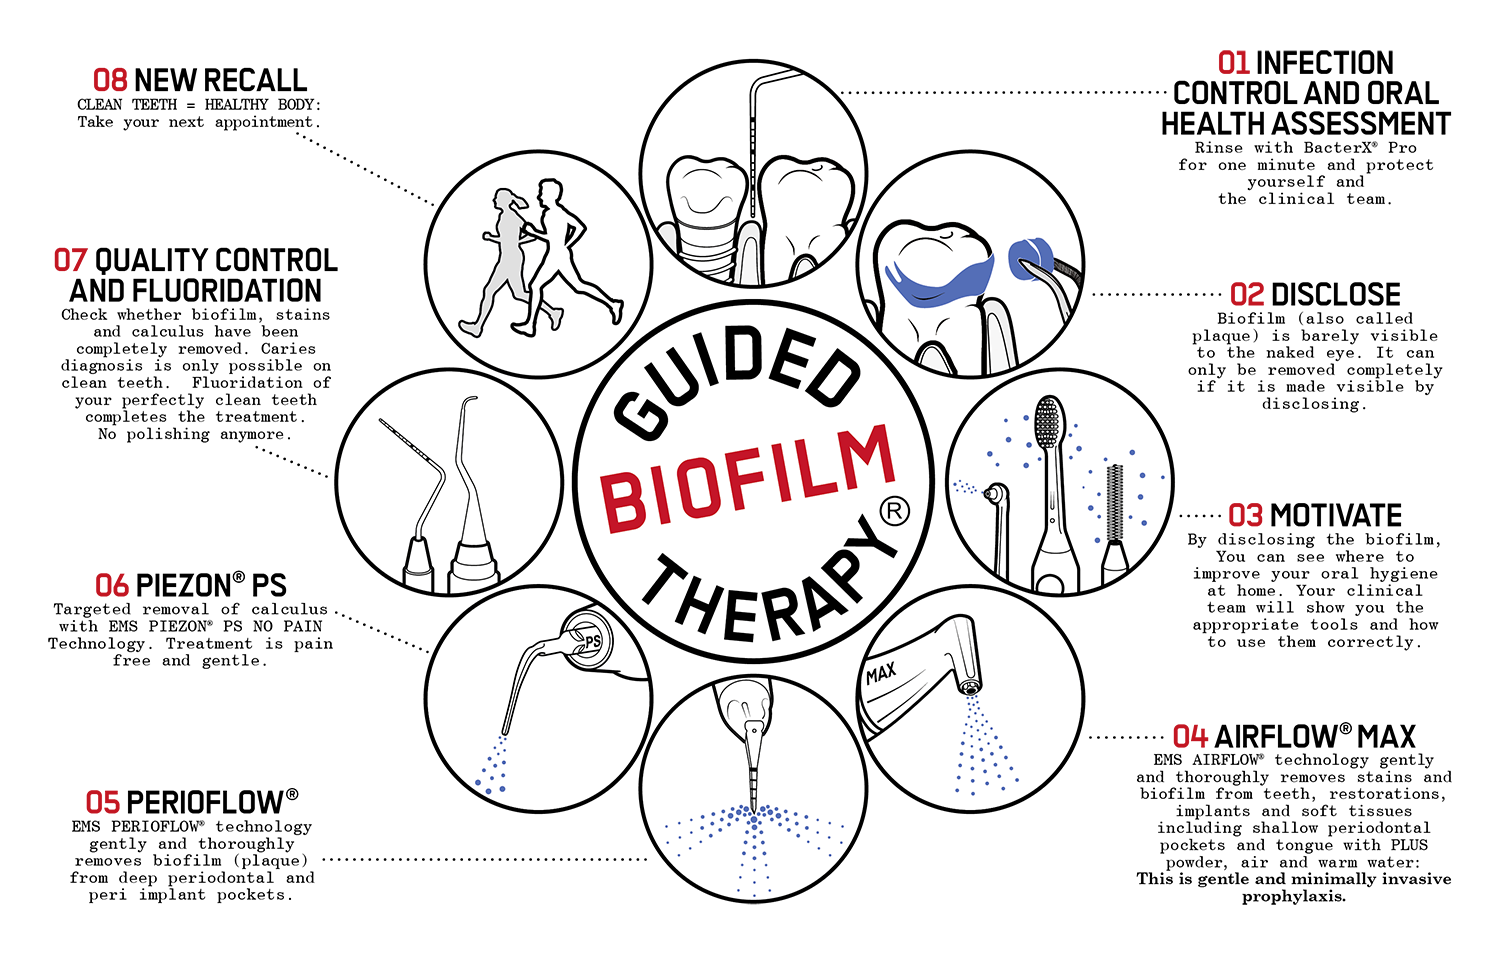 Guide Biofilm Therapy what is involved in treatment